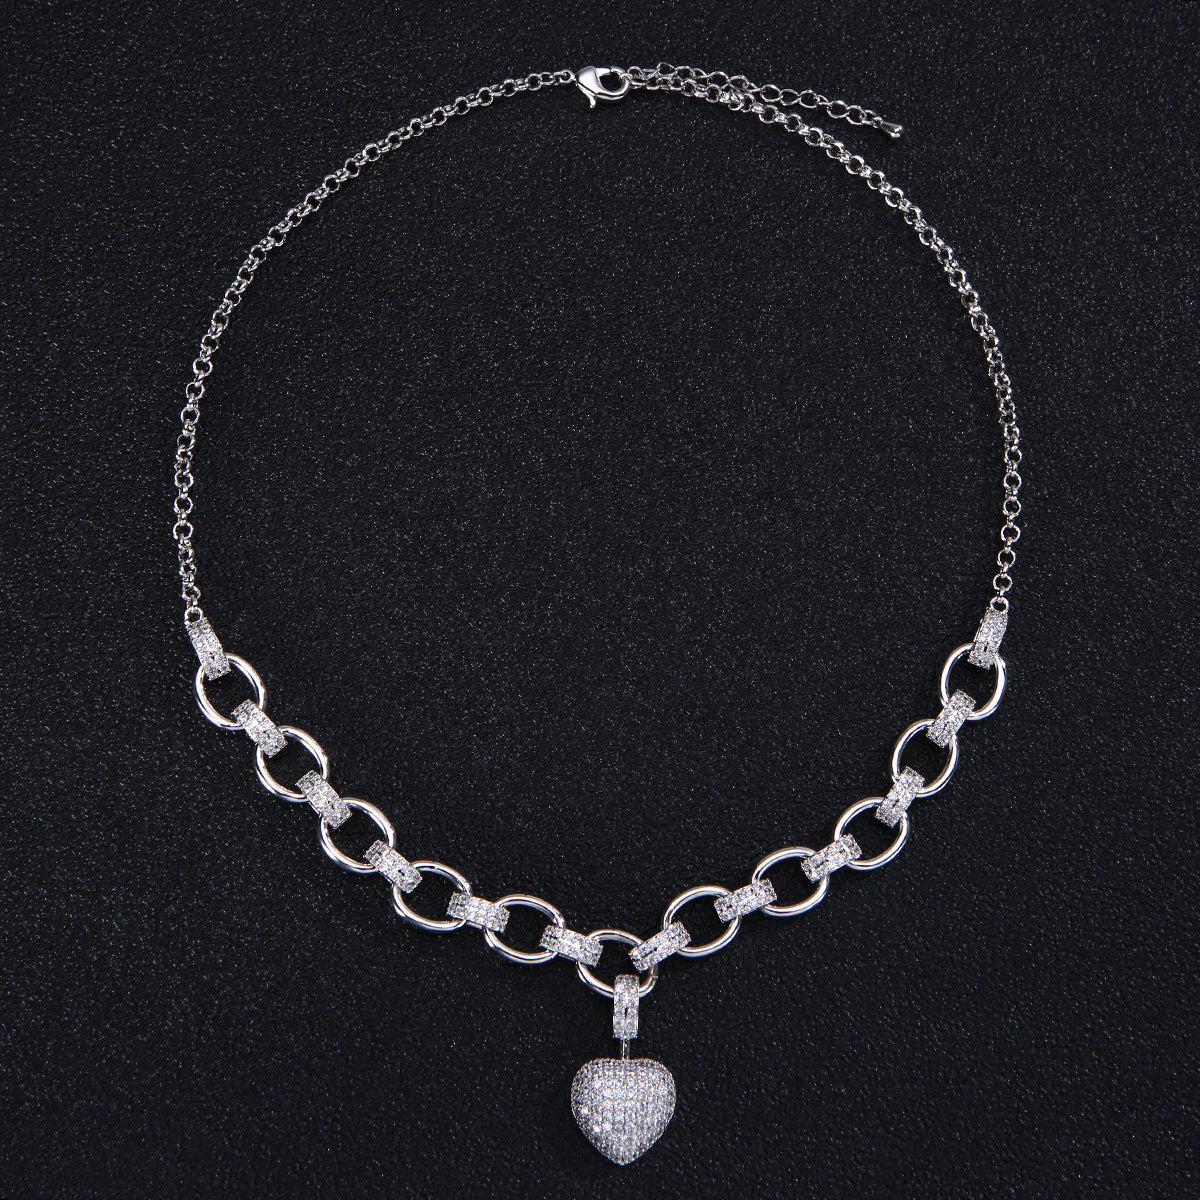 Luxury Cubic Zirconia Bracelet and Necklace Set with Heart Charm